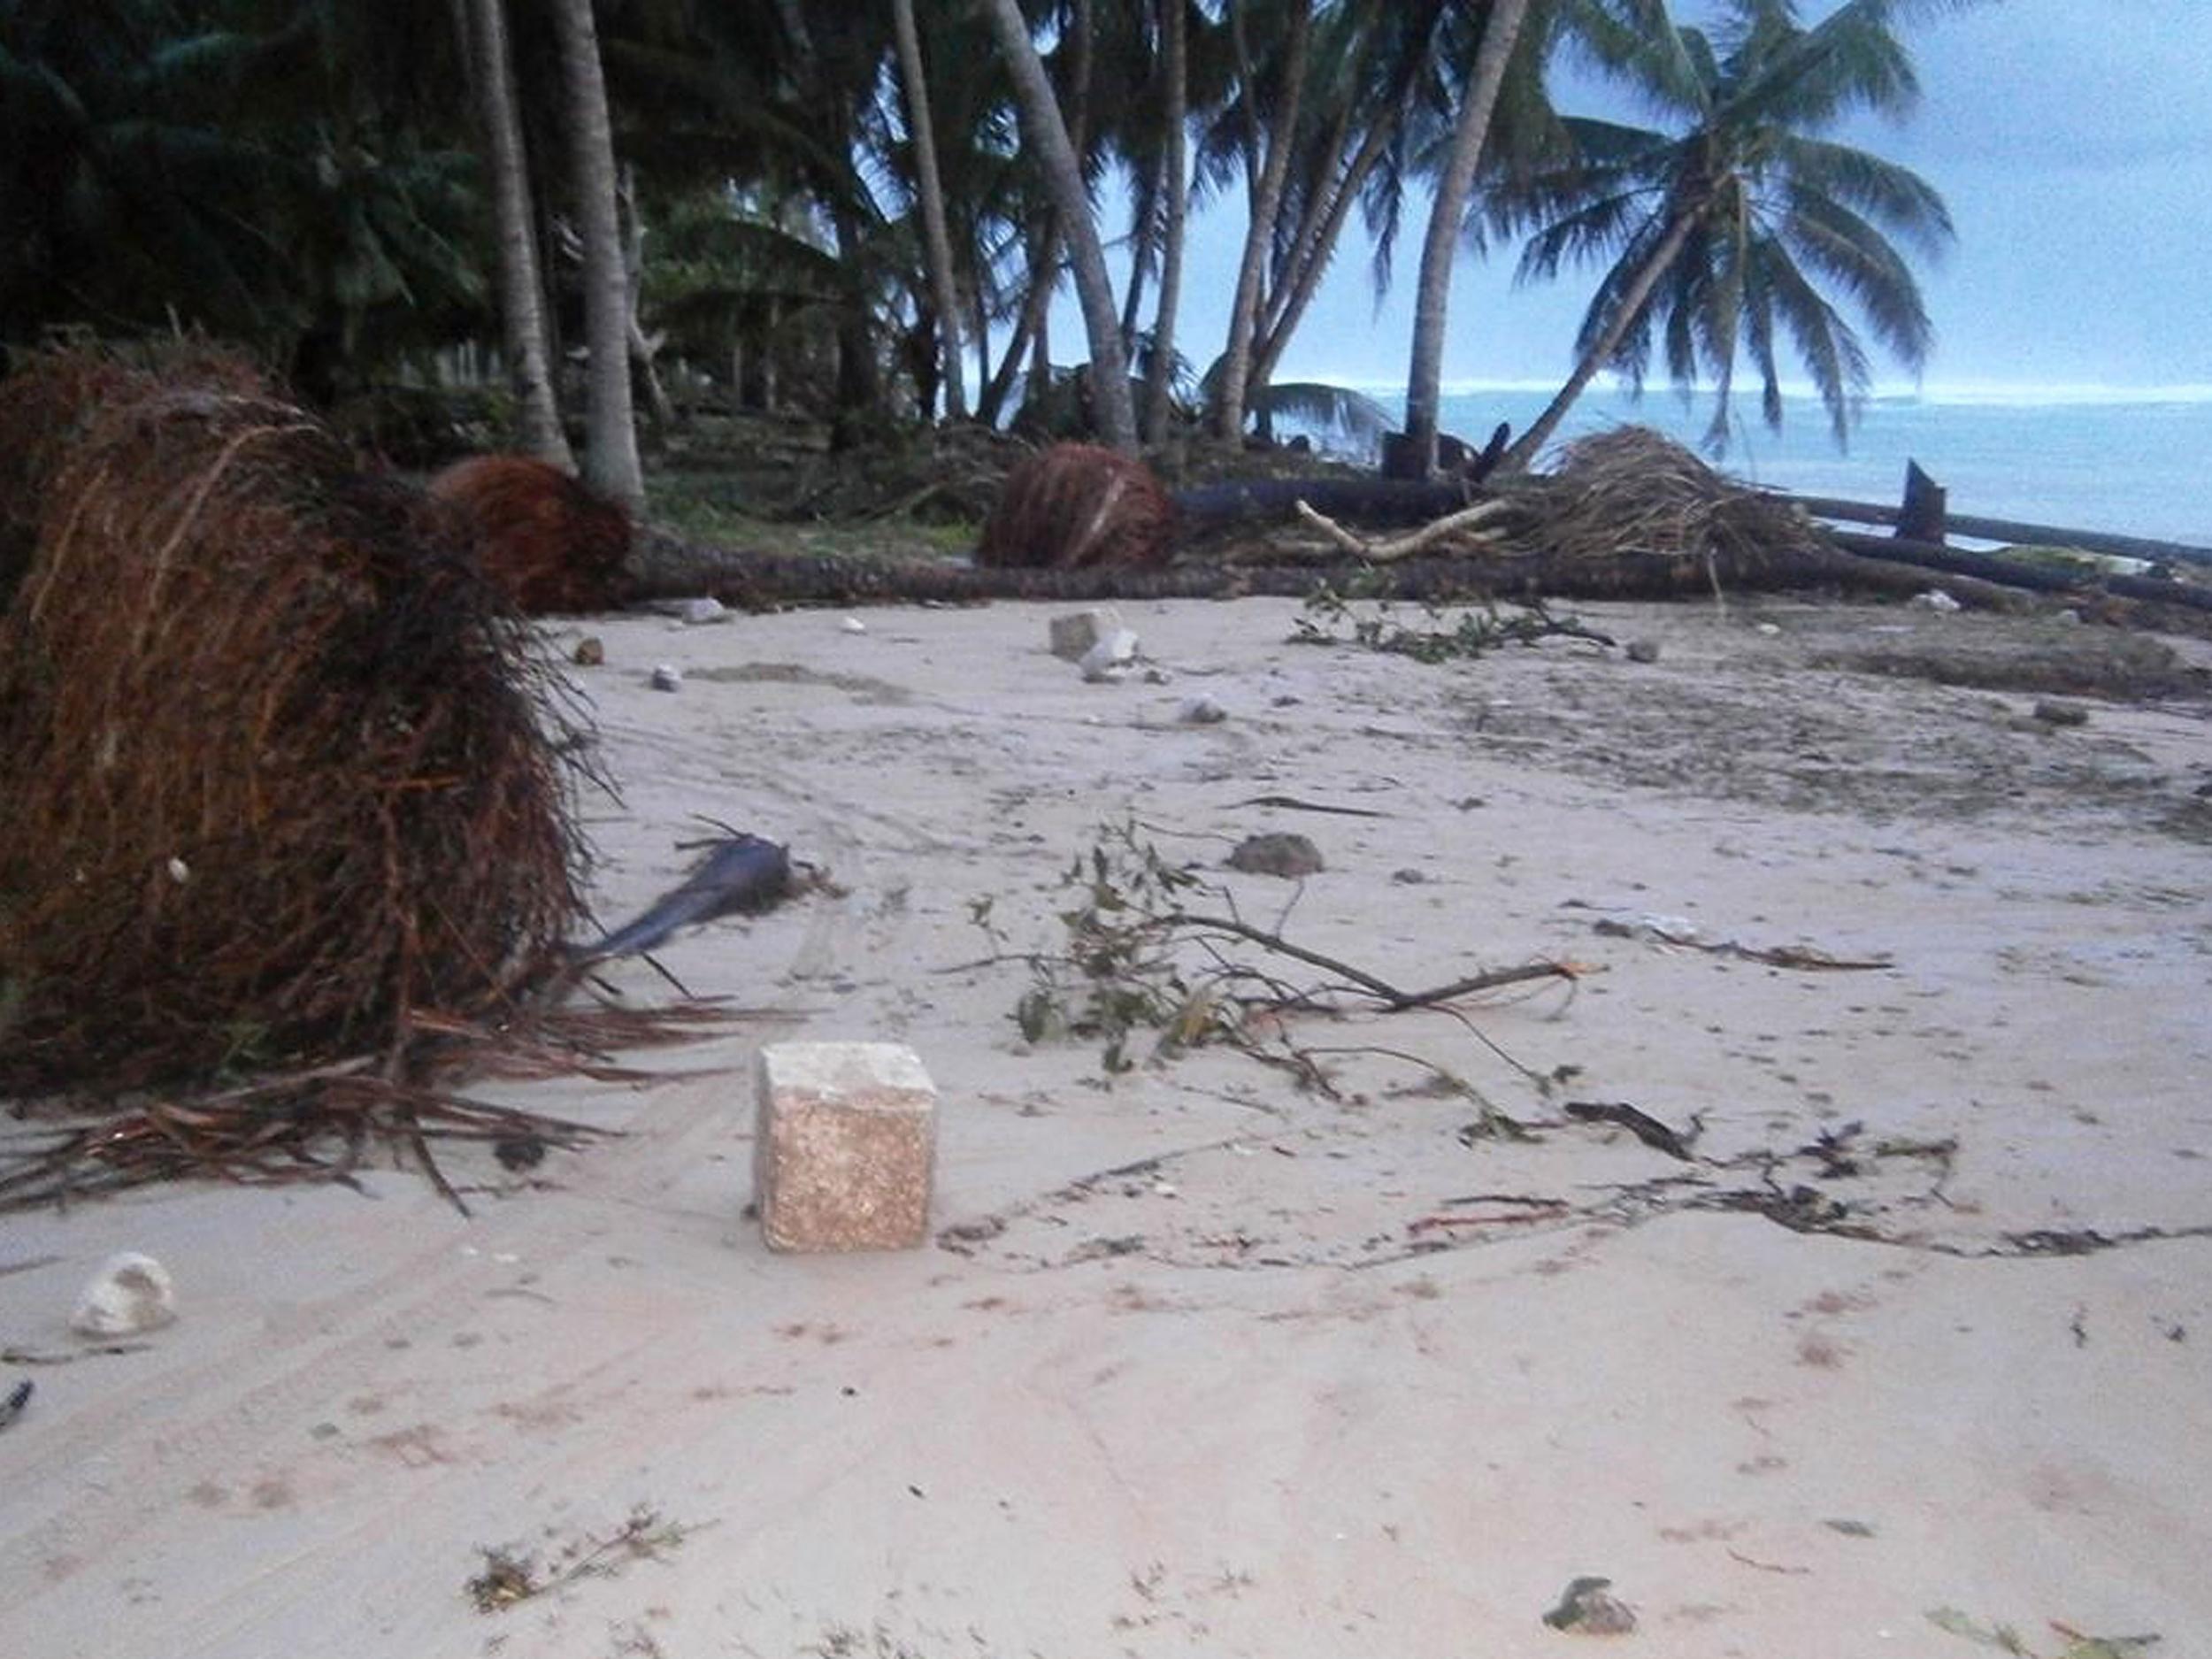 A beach littered with debris from a storm surge on the island of Tuvalu